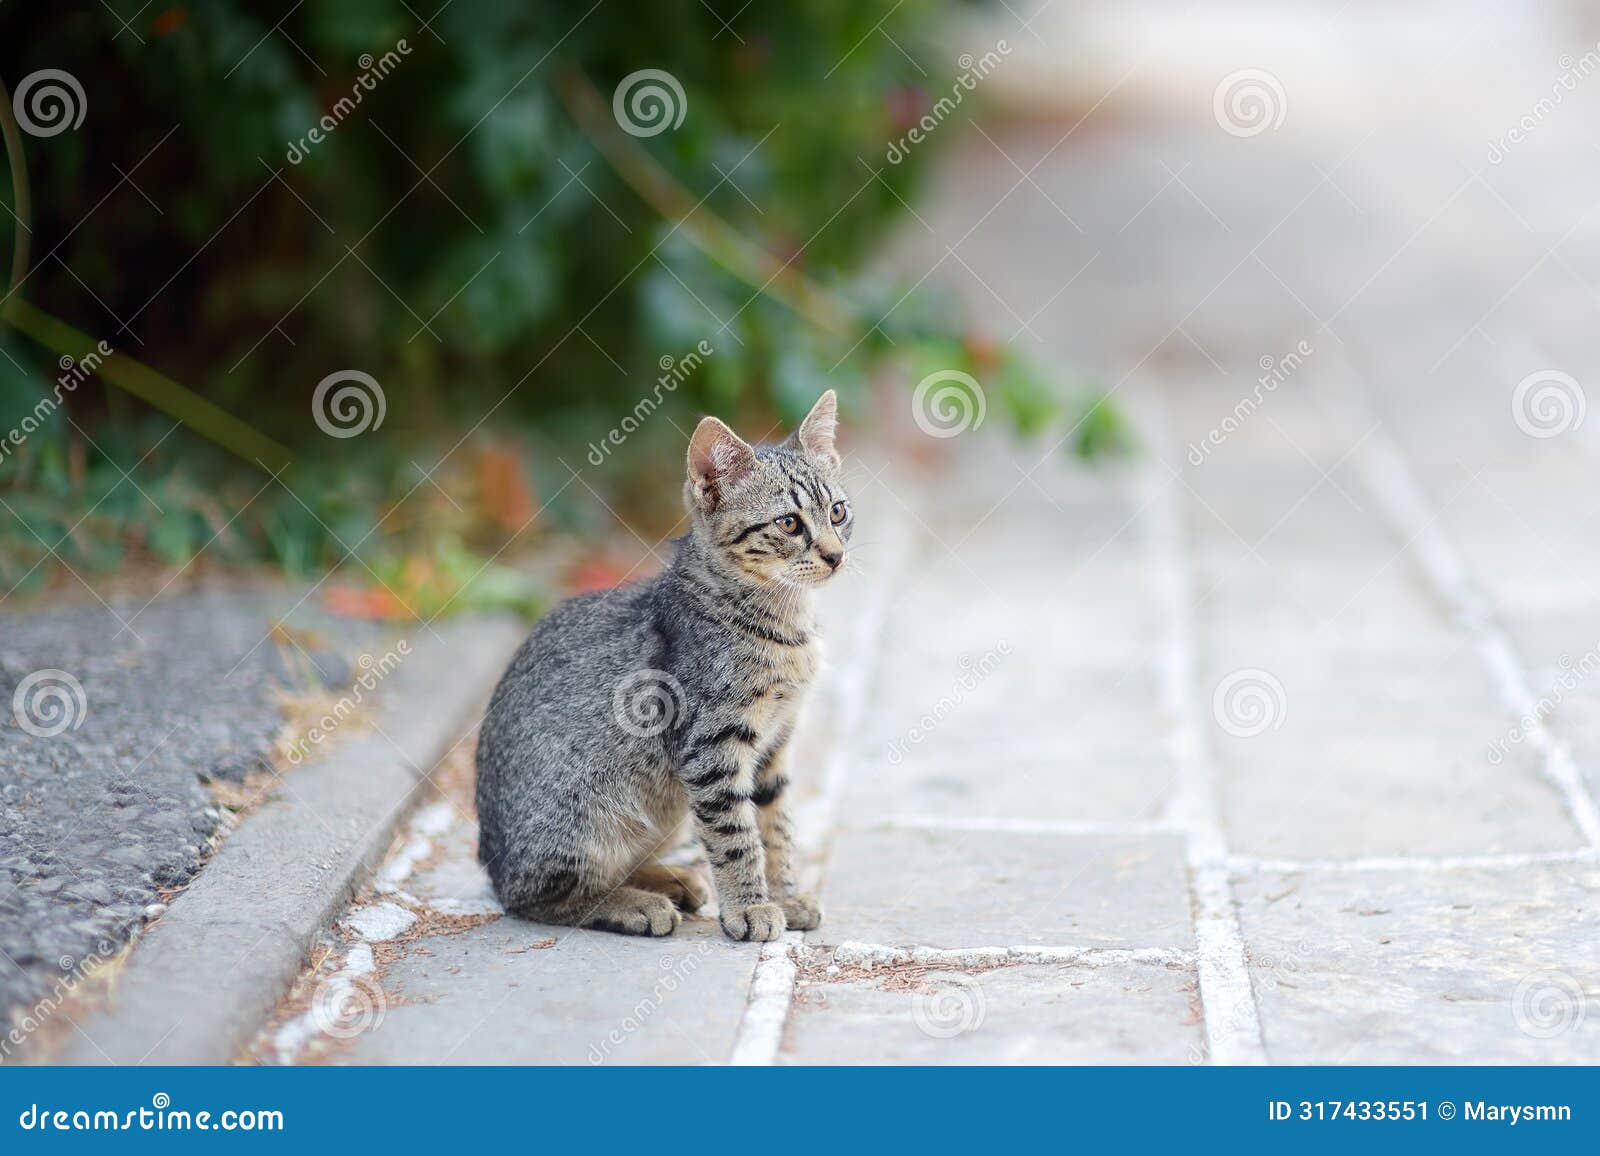 young beauty cat on summer day on street of town. cute kitty. tabby pussycat. lost pet